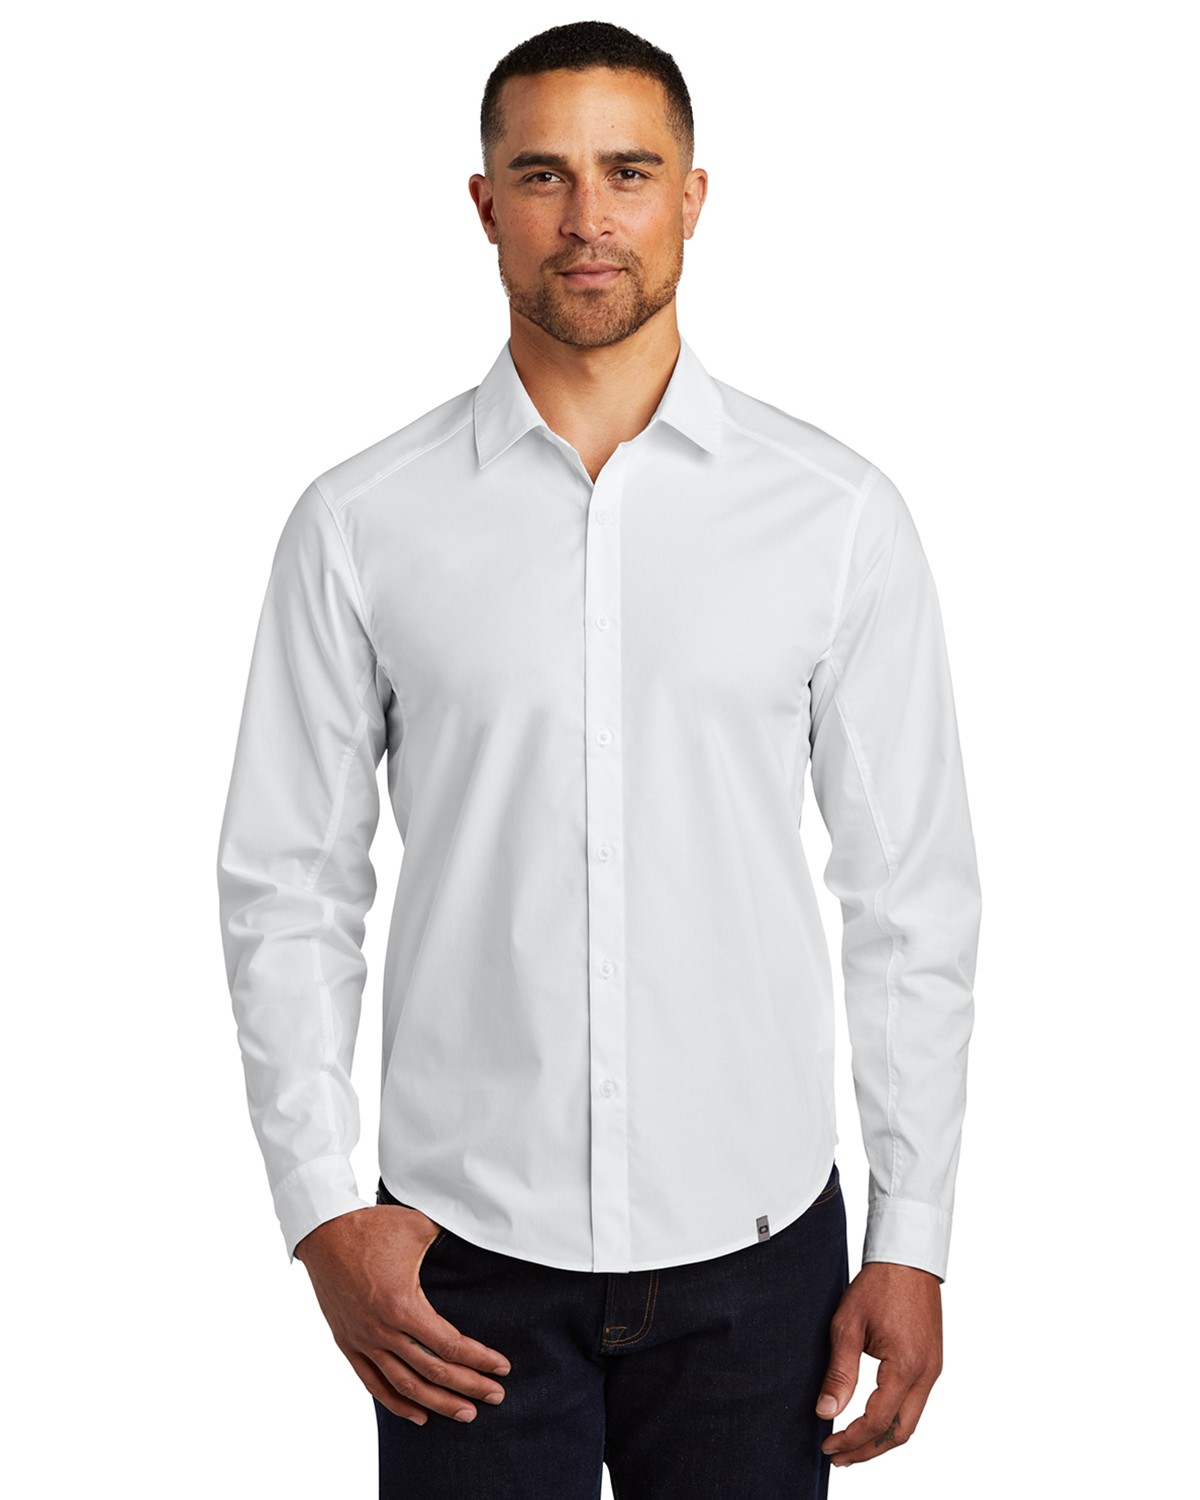 Reviews about Ogio Commuter Woven Shirt.